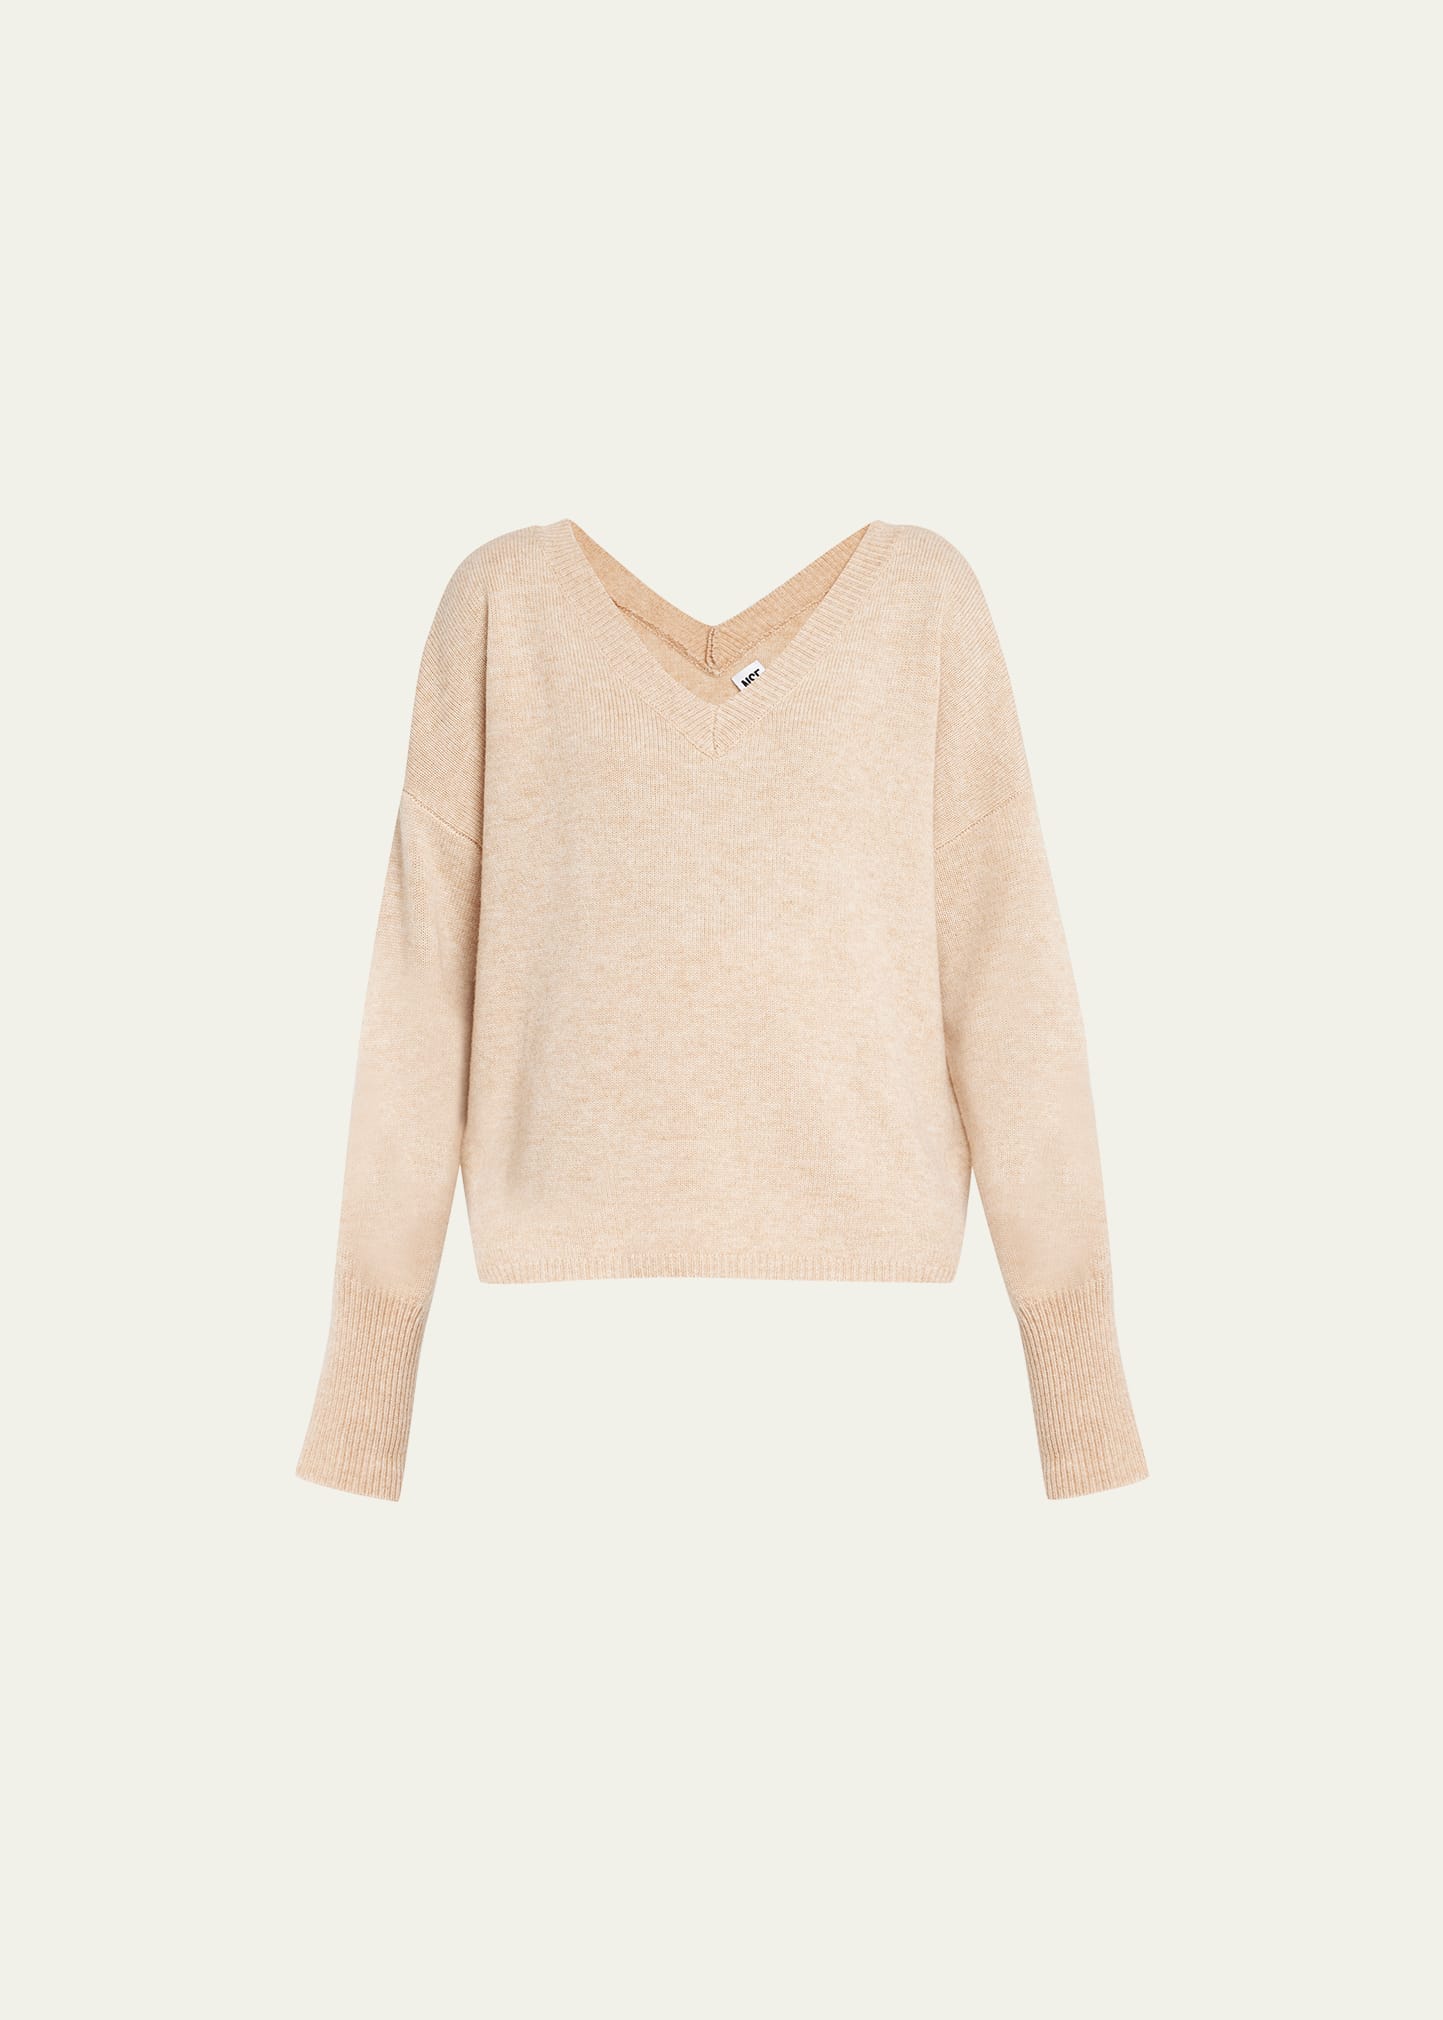 Everlyn Double V Wool-Blend Sweater